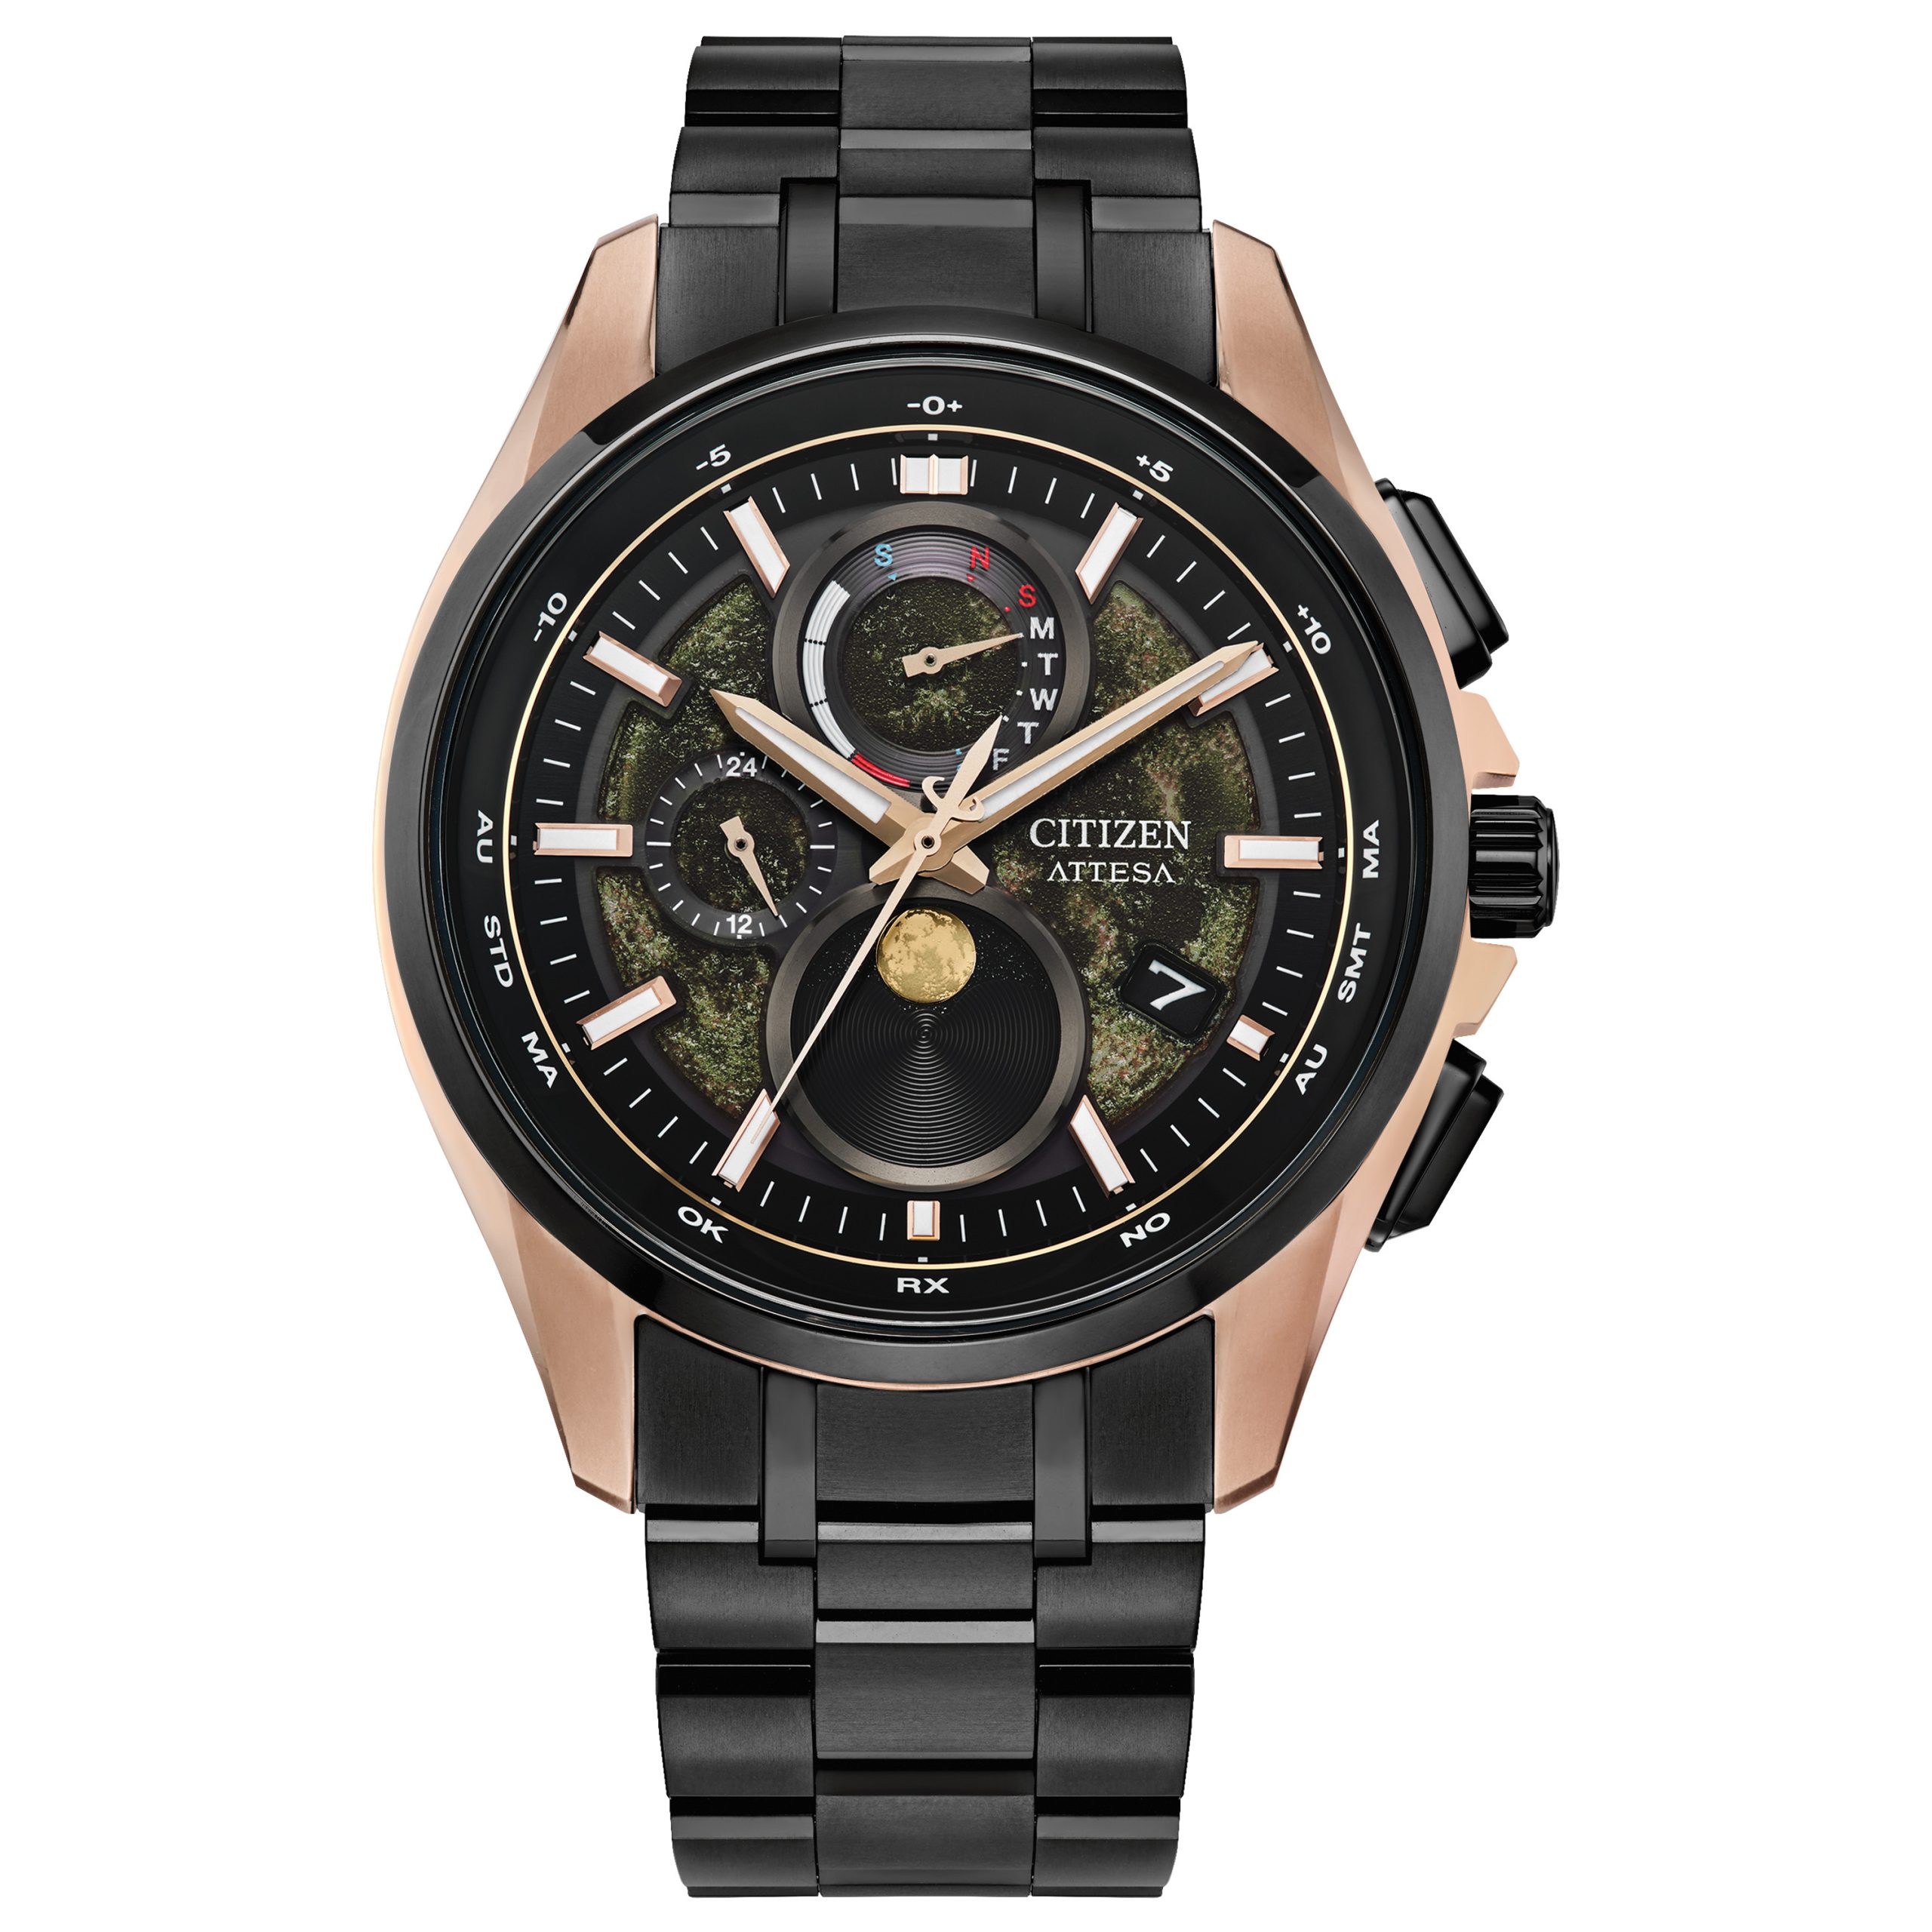 Citizen Attessa new watches made in collaboration with space.